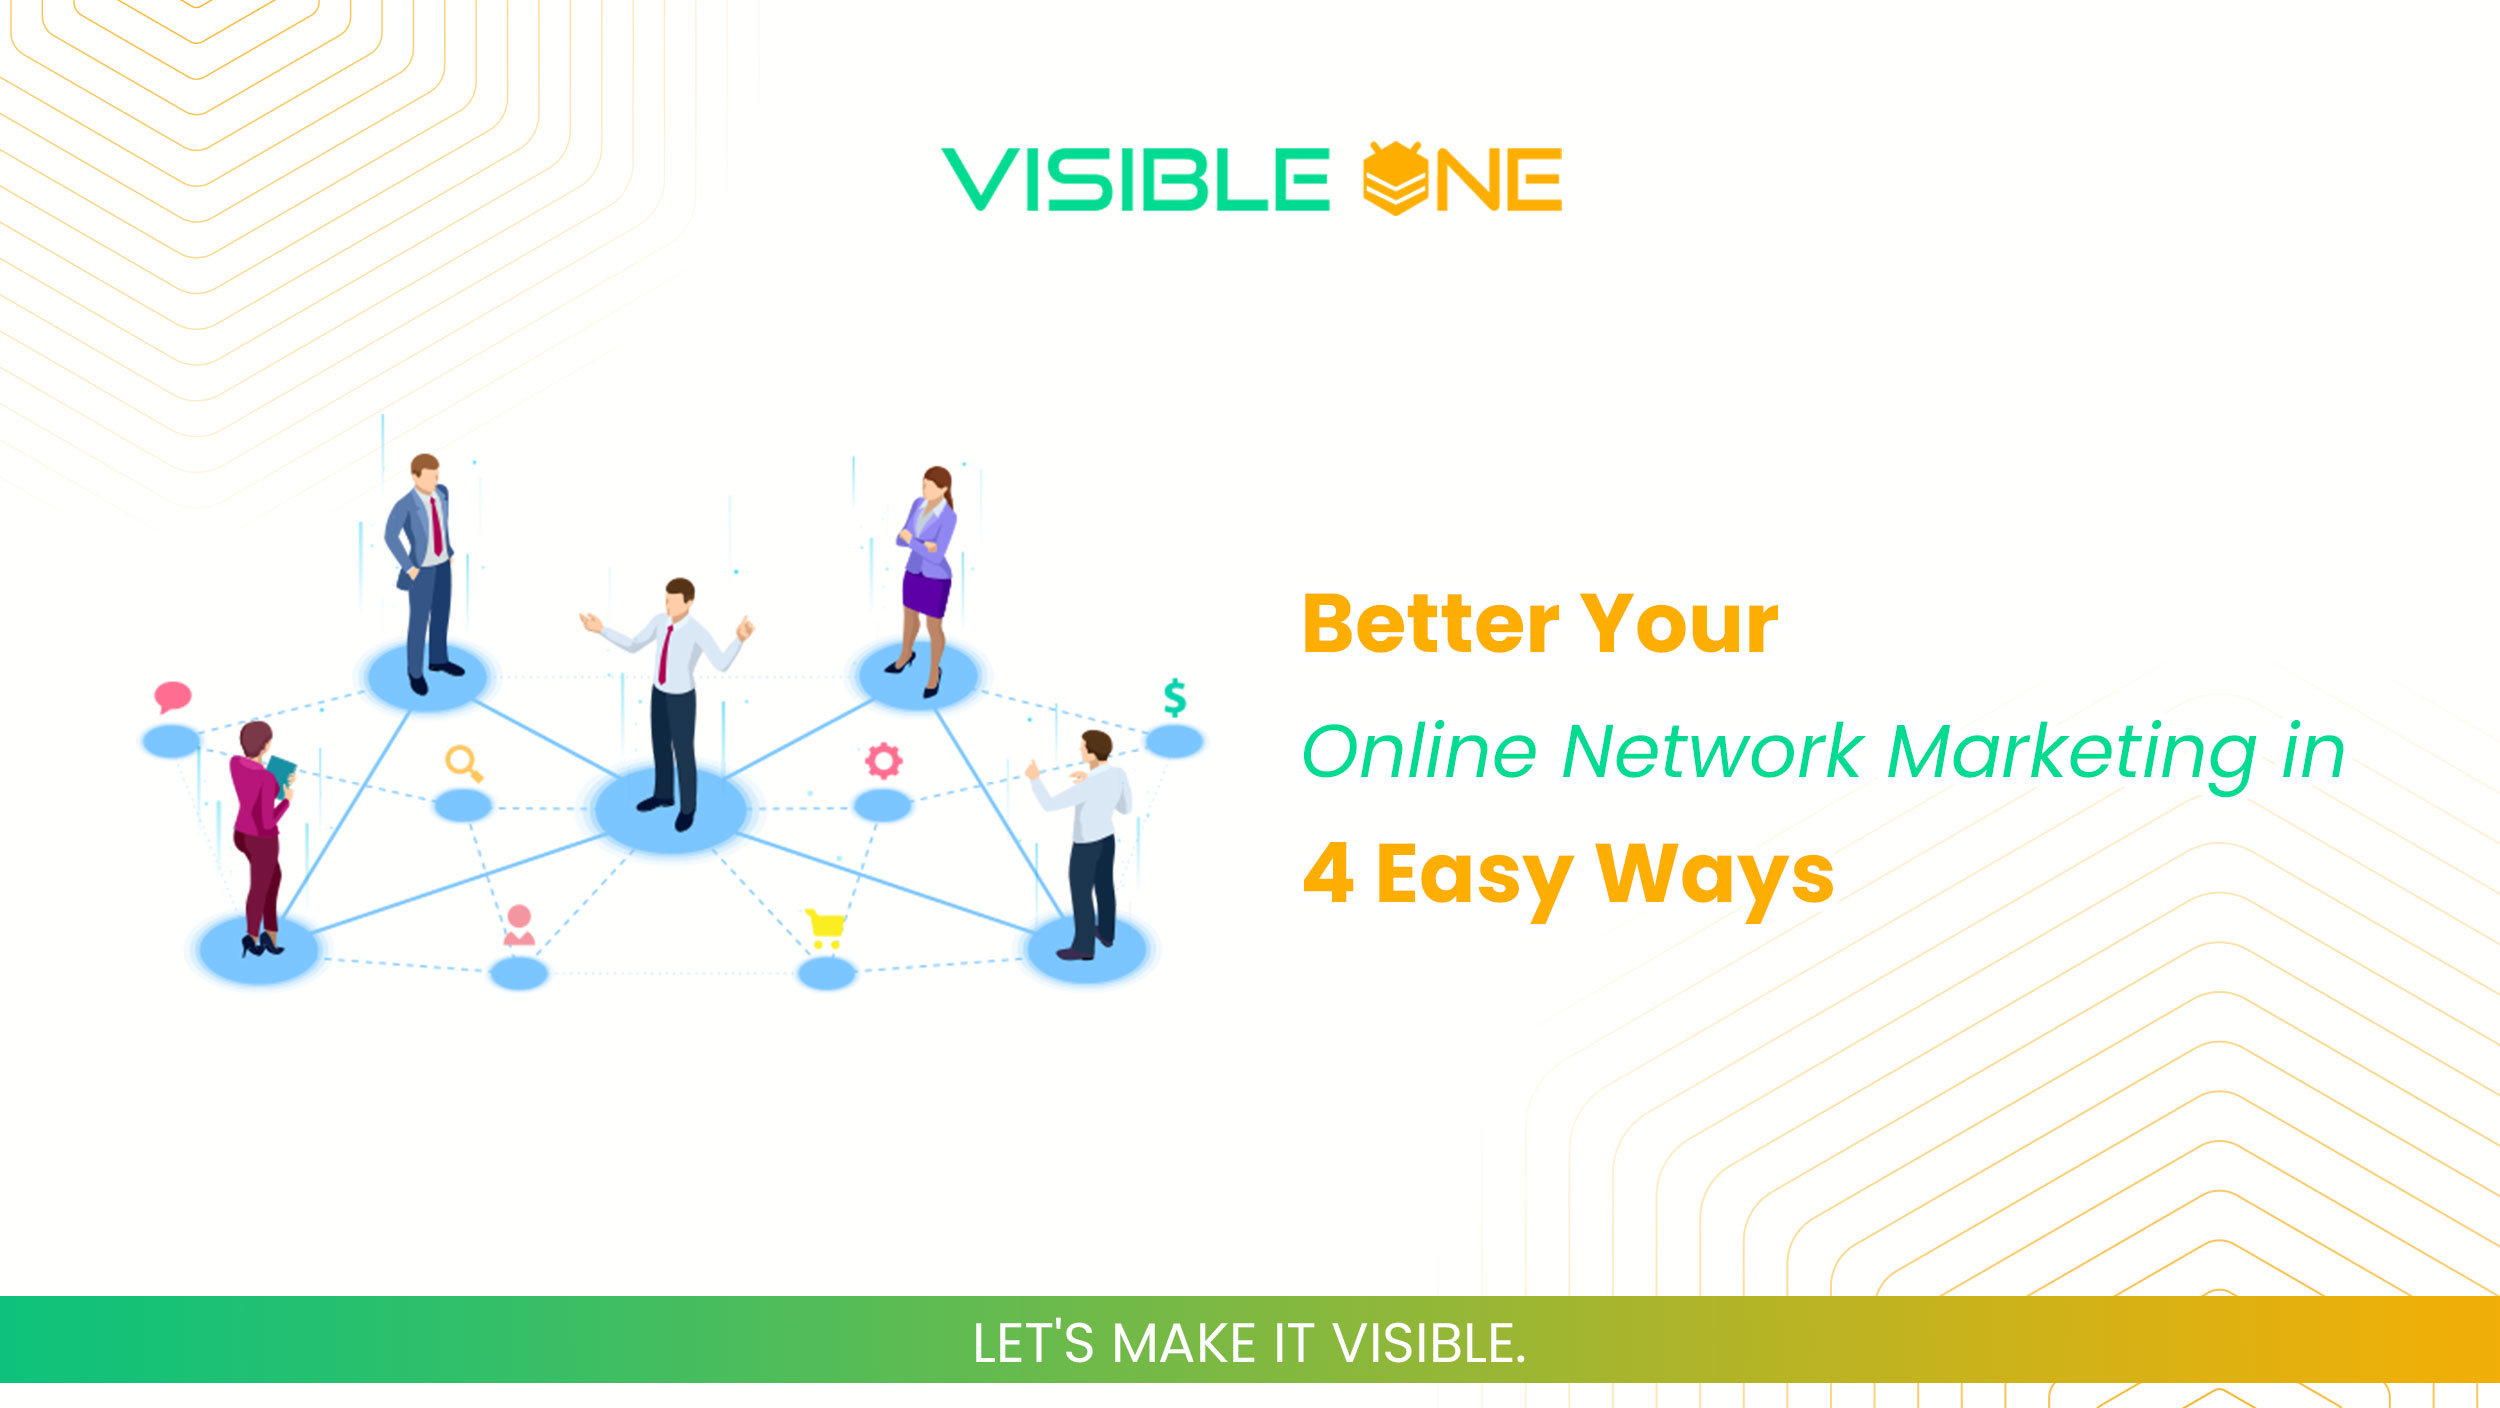 Better Your Online Network Marketing in 4 Easy Ways